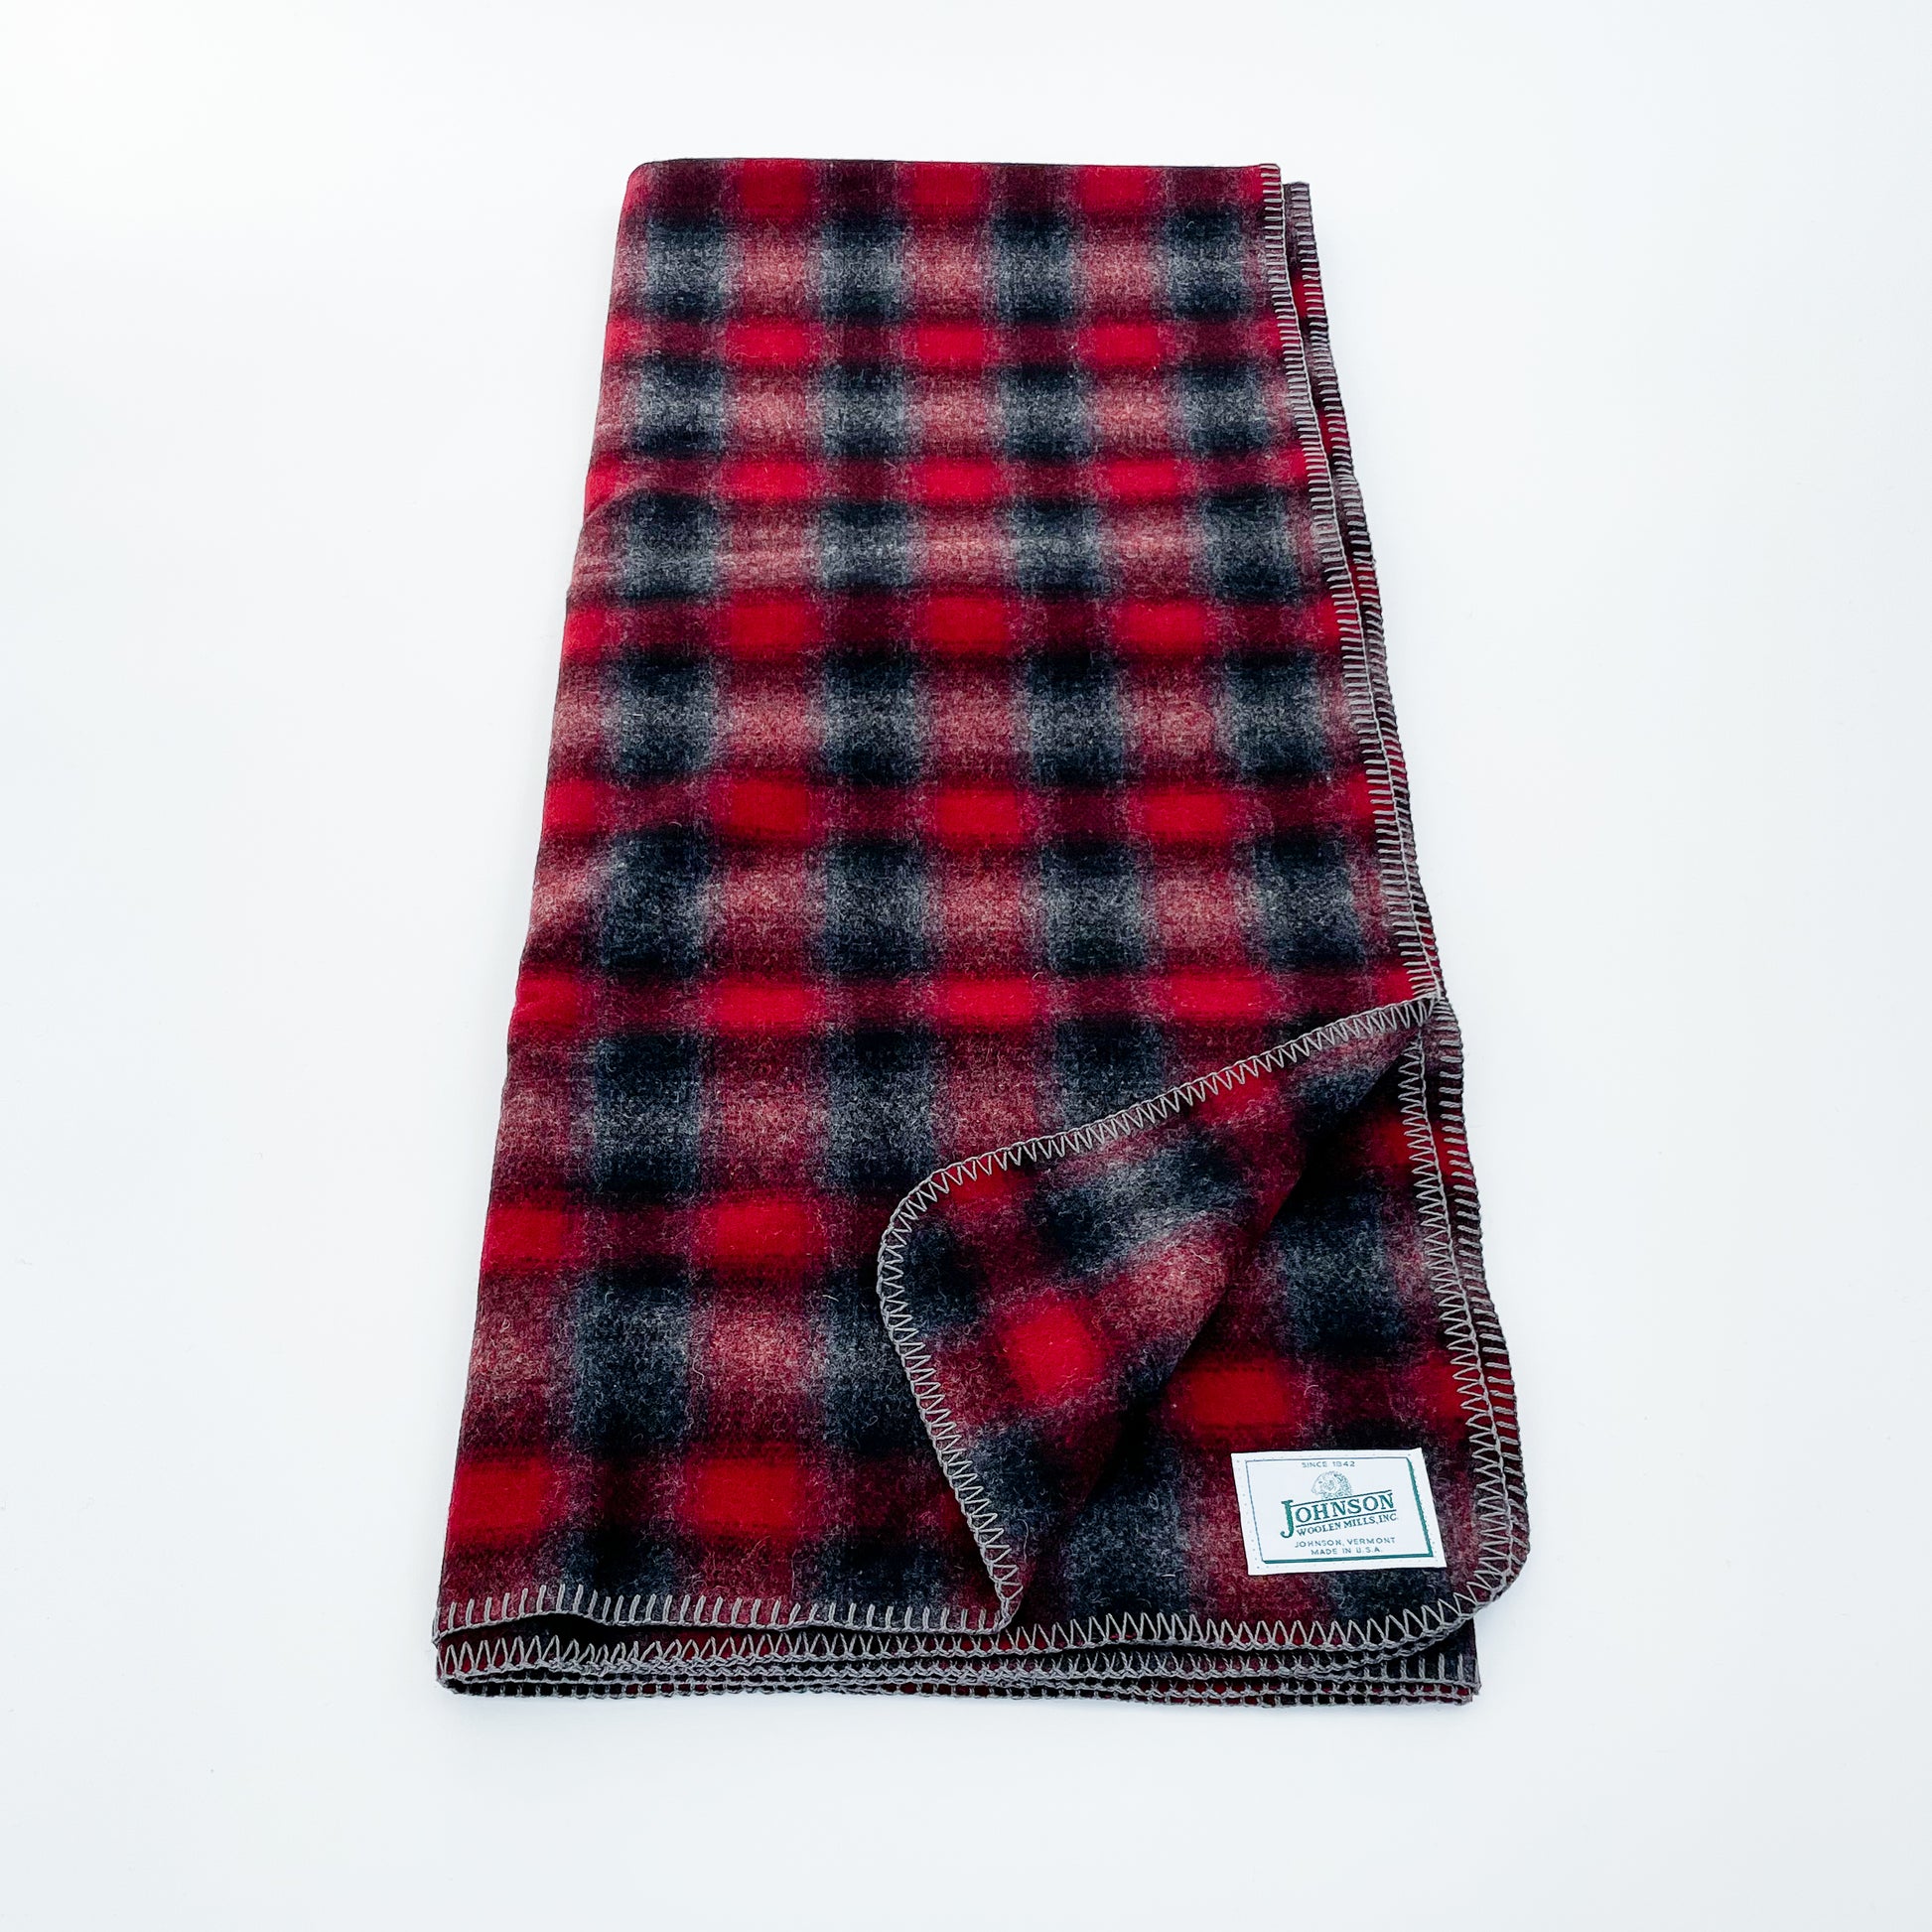 Johnson Woolen Mills Throw, Red/Black/Gray Muted Plaid, unfolded view